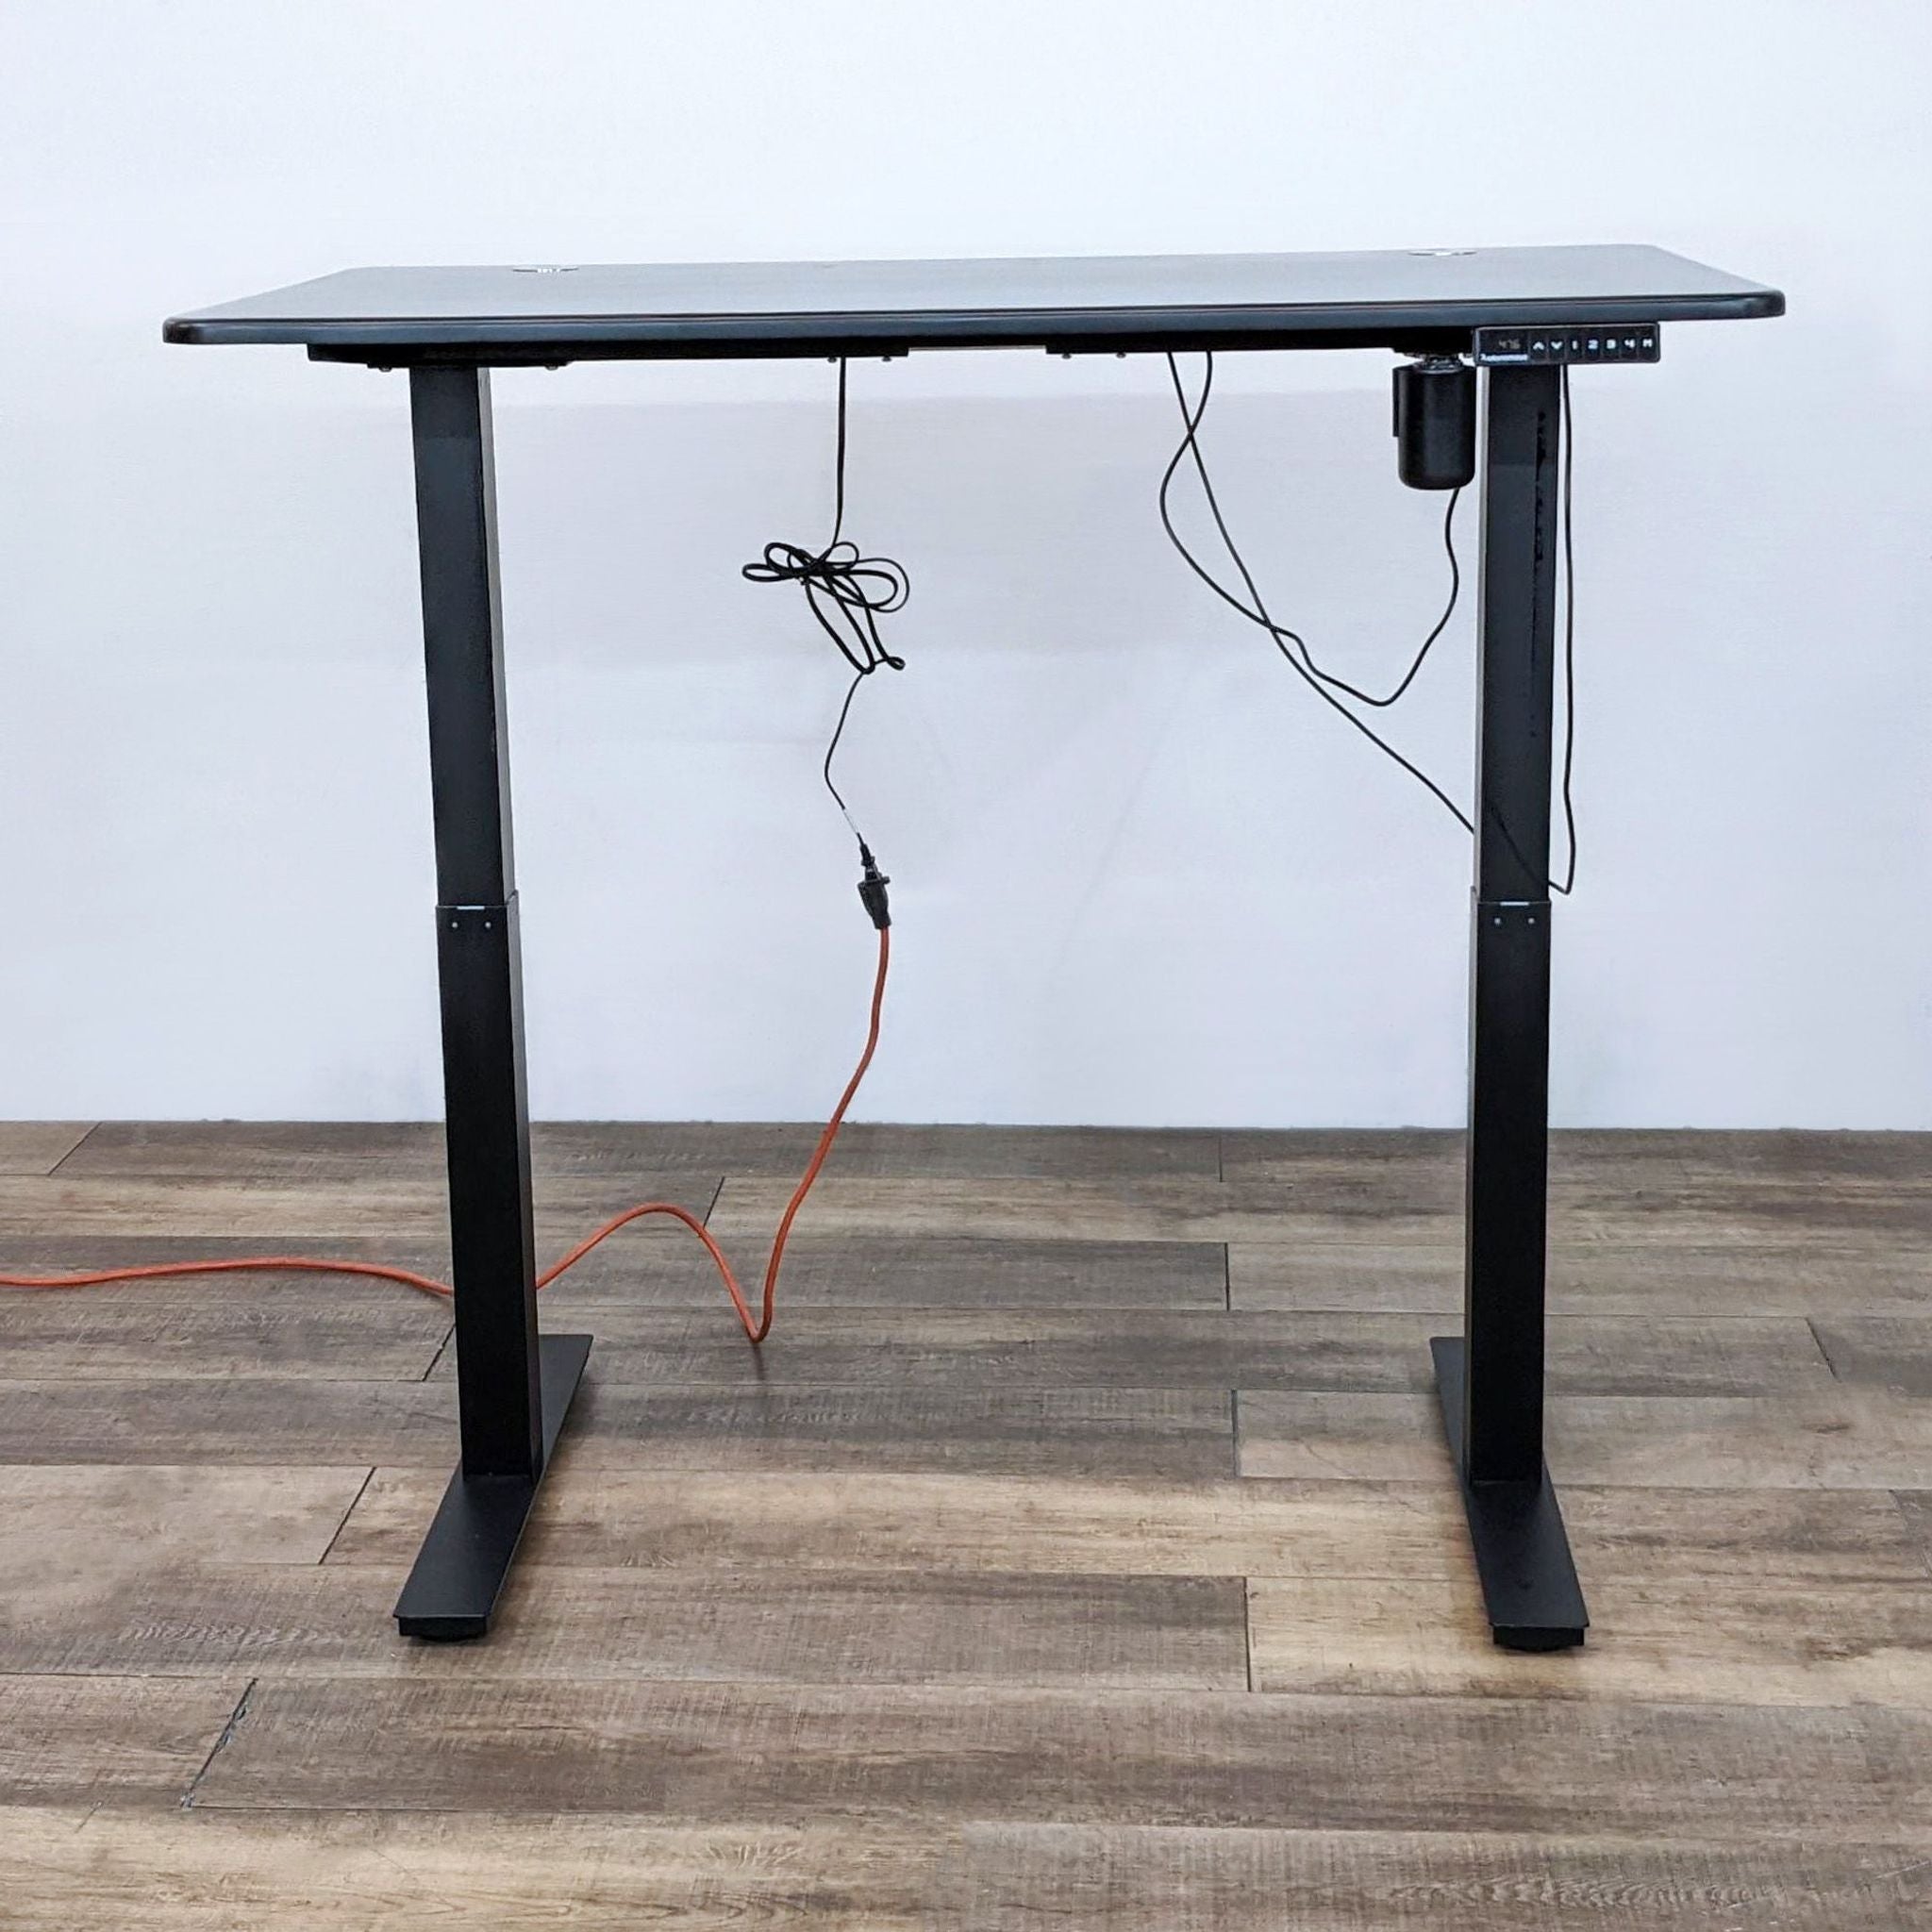 Alt text: Autonomous brand black motorized adjustable-height desk with control panel, on a steel frame against a white wall.